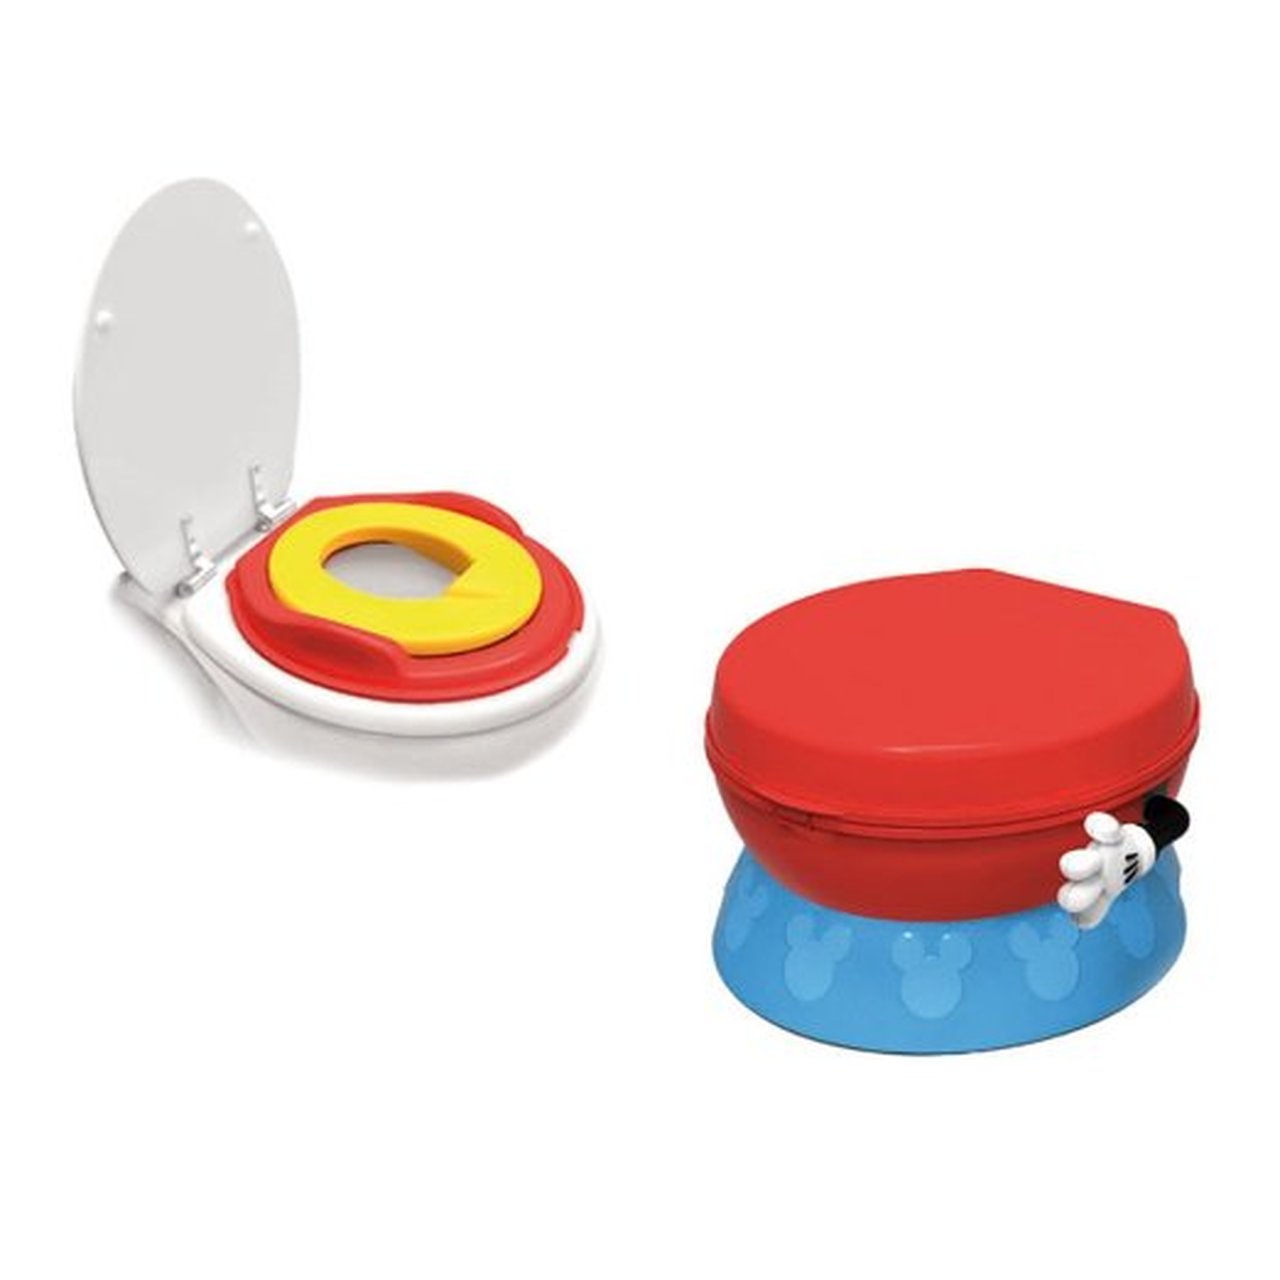 The First Years 3-In-1 Potty System